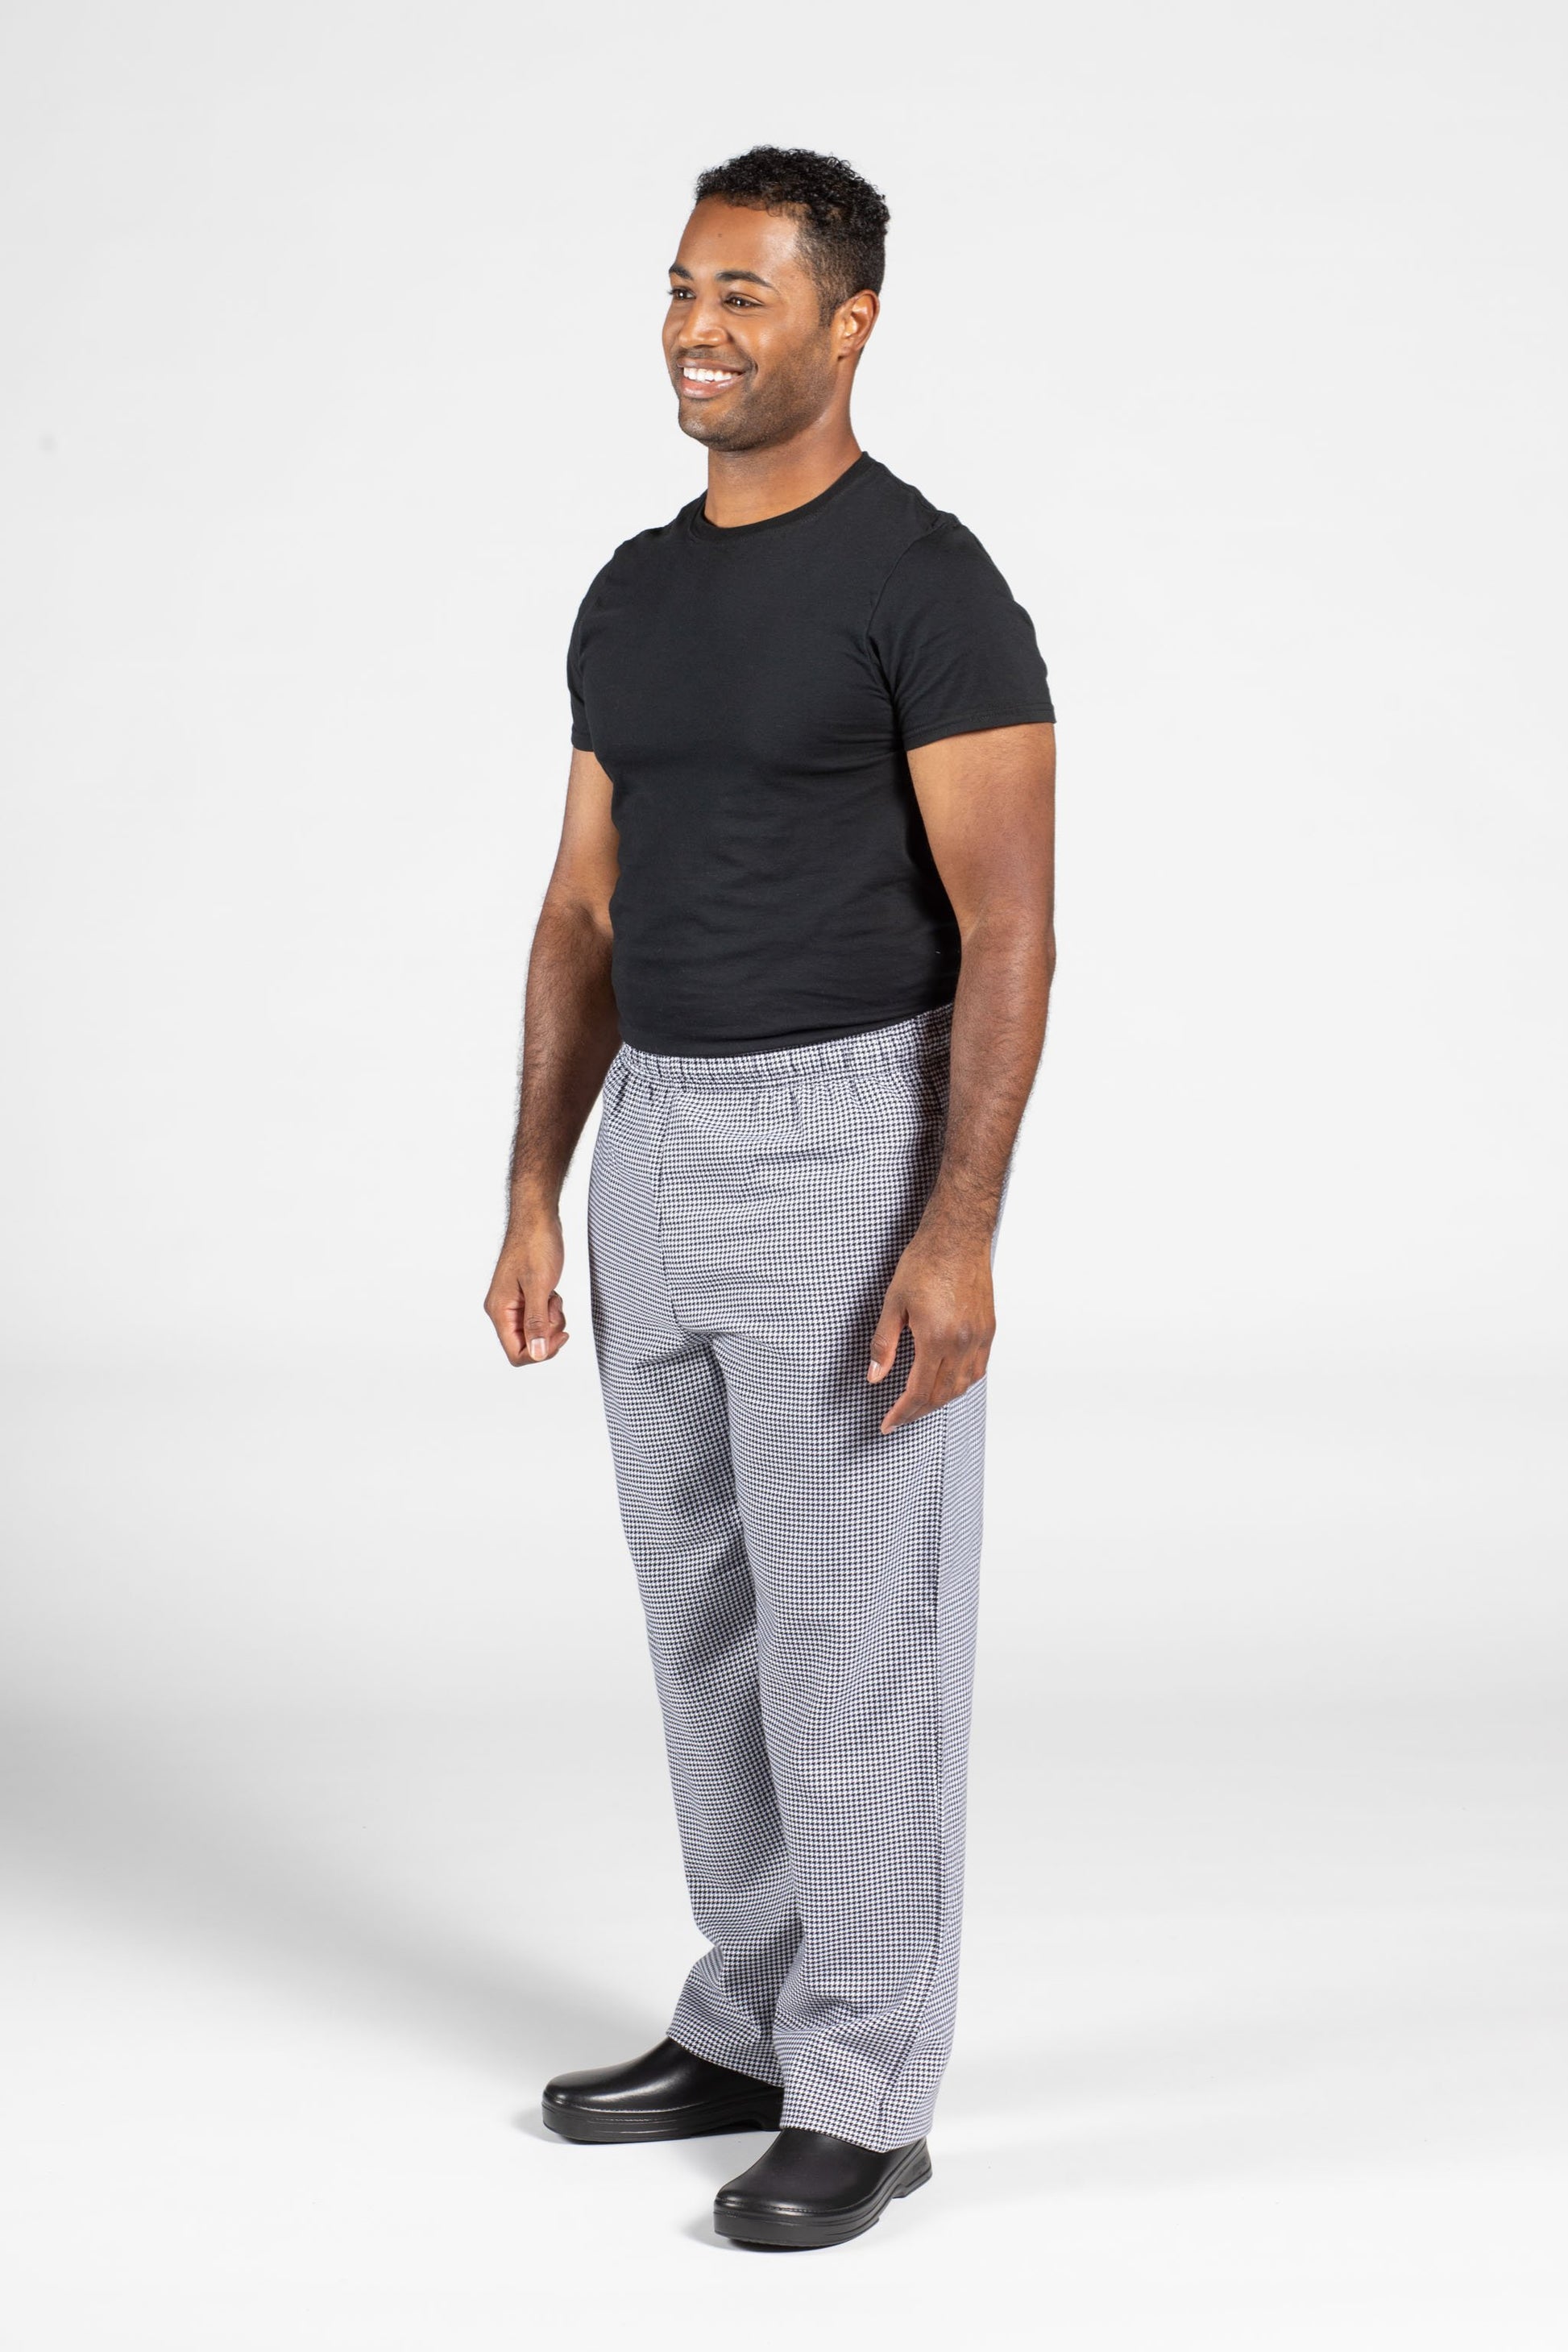 Traditional Chef Pant #4010 – Uncommon Chef